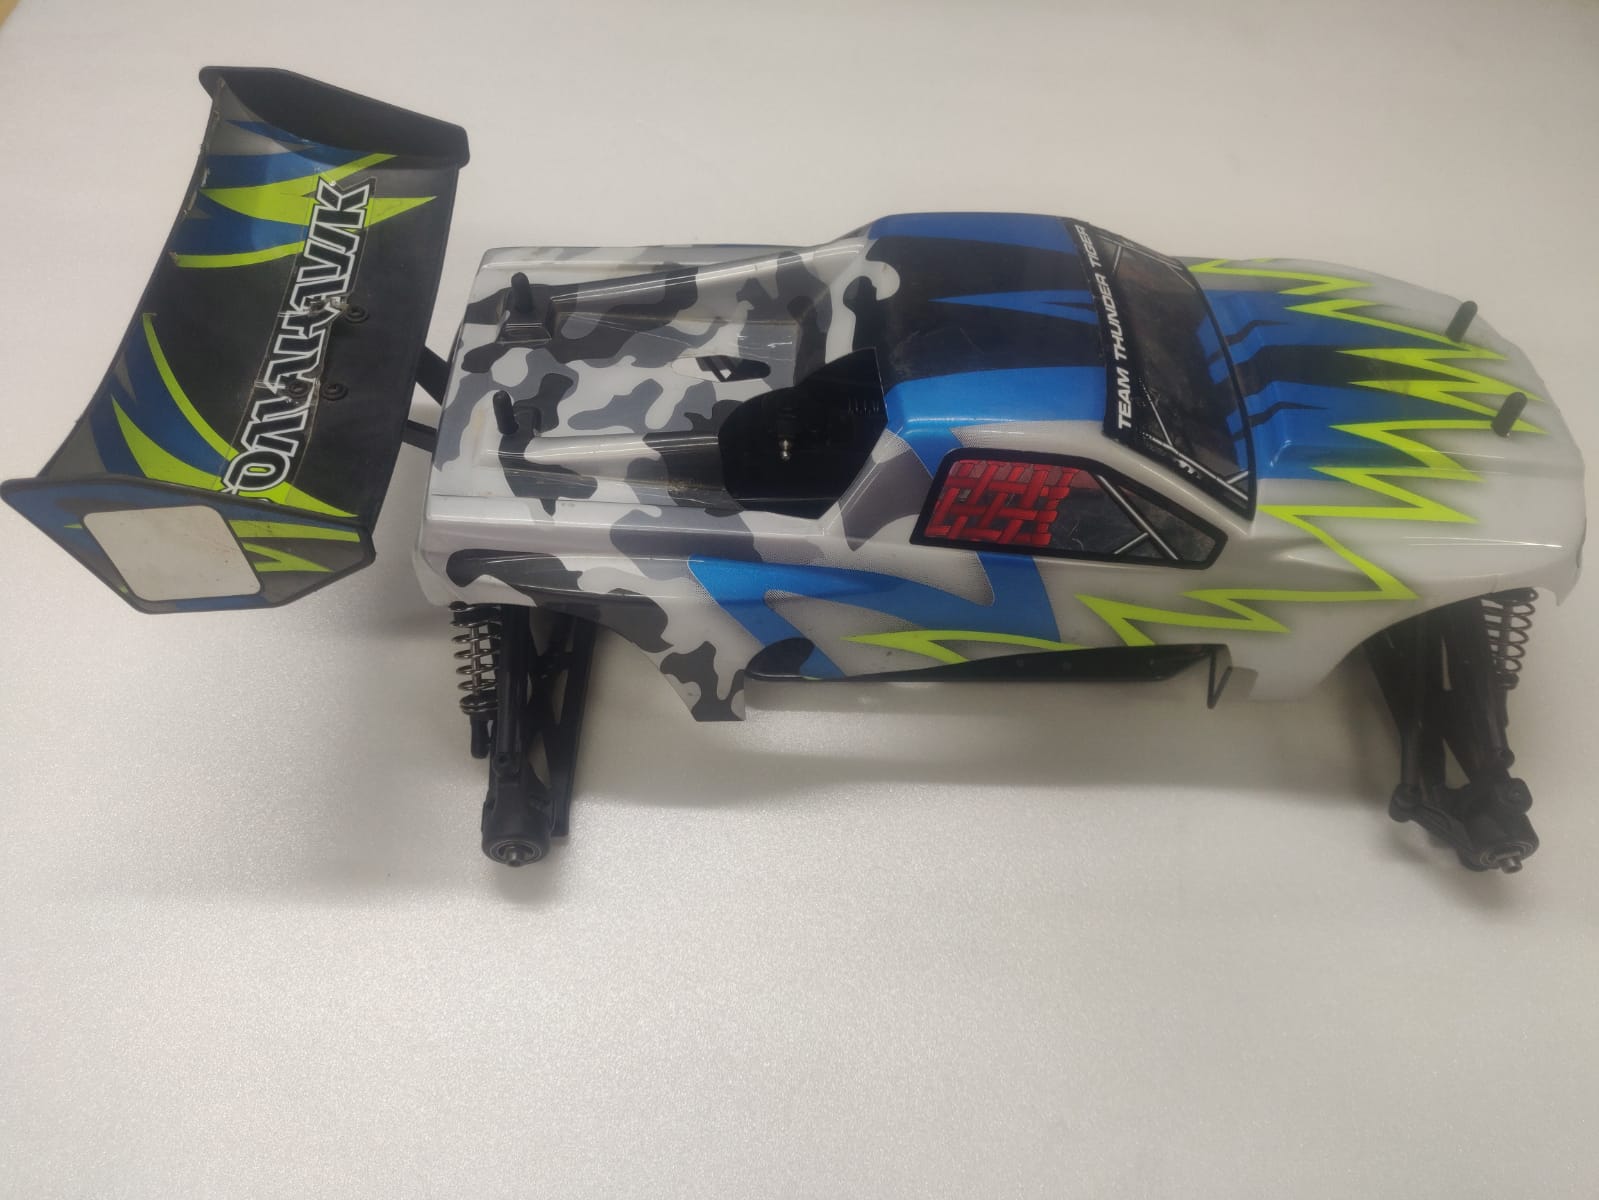 Tomahawk 1:10Scale 4Wd Nitro Powered Racing Truggy Parts - Rc (Quality Pre Owned)